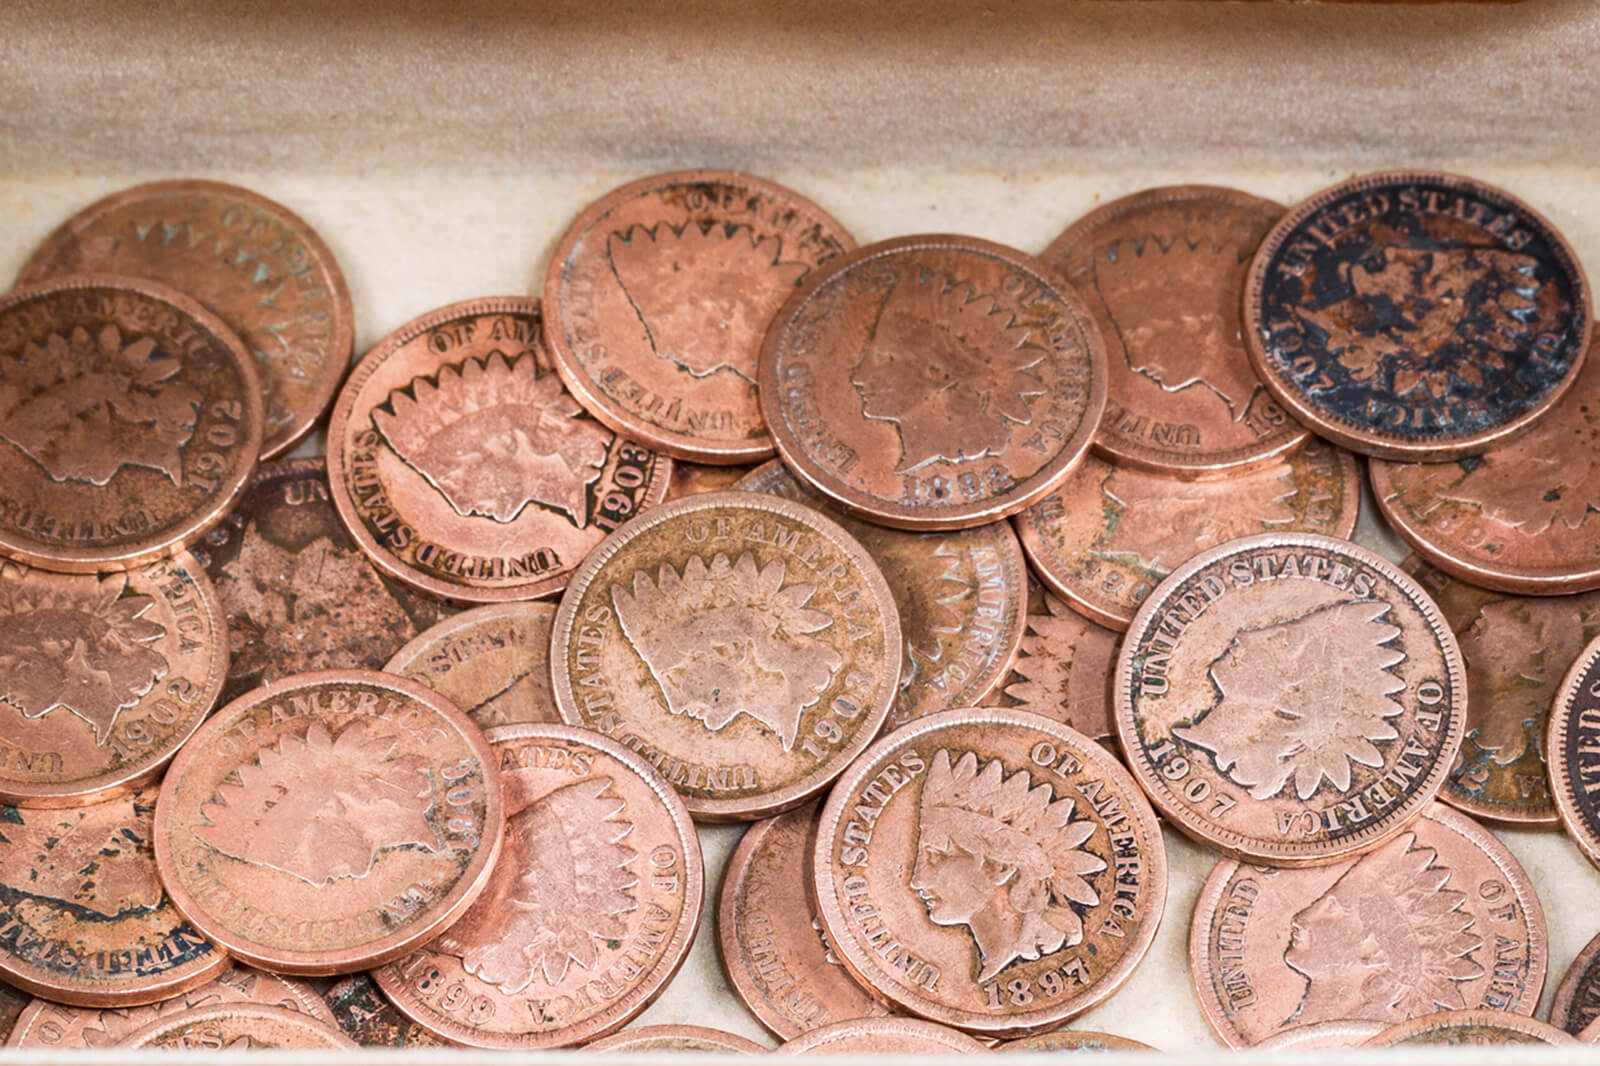 These 20 Most Valuable Pennies Are Worth $ Million | Work + Money